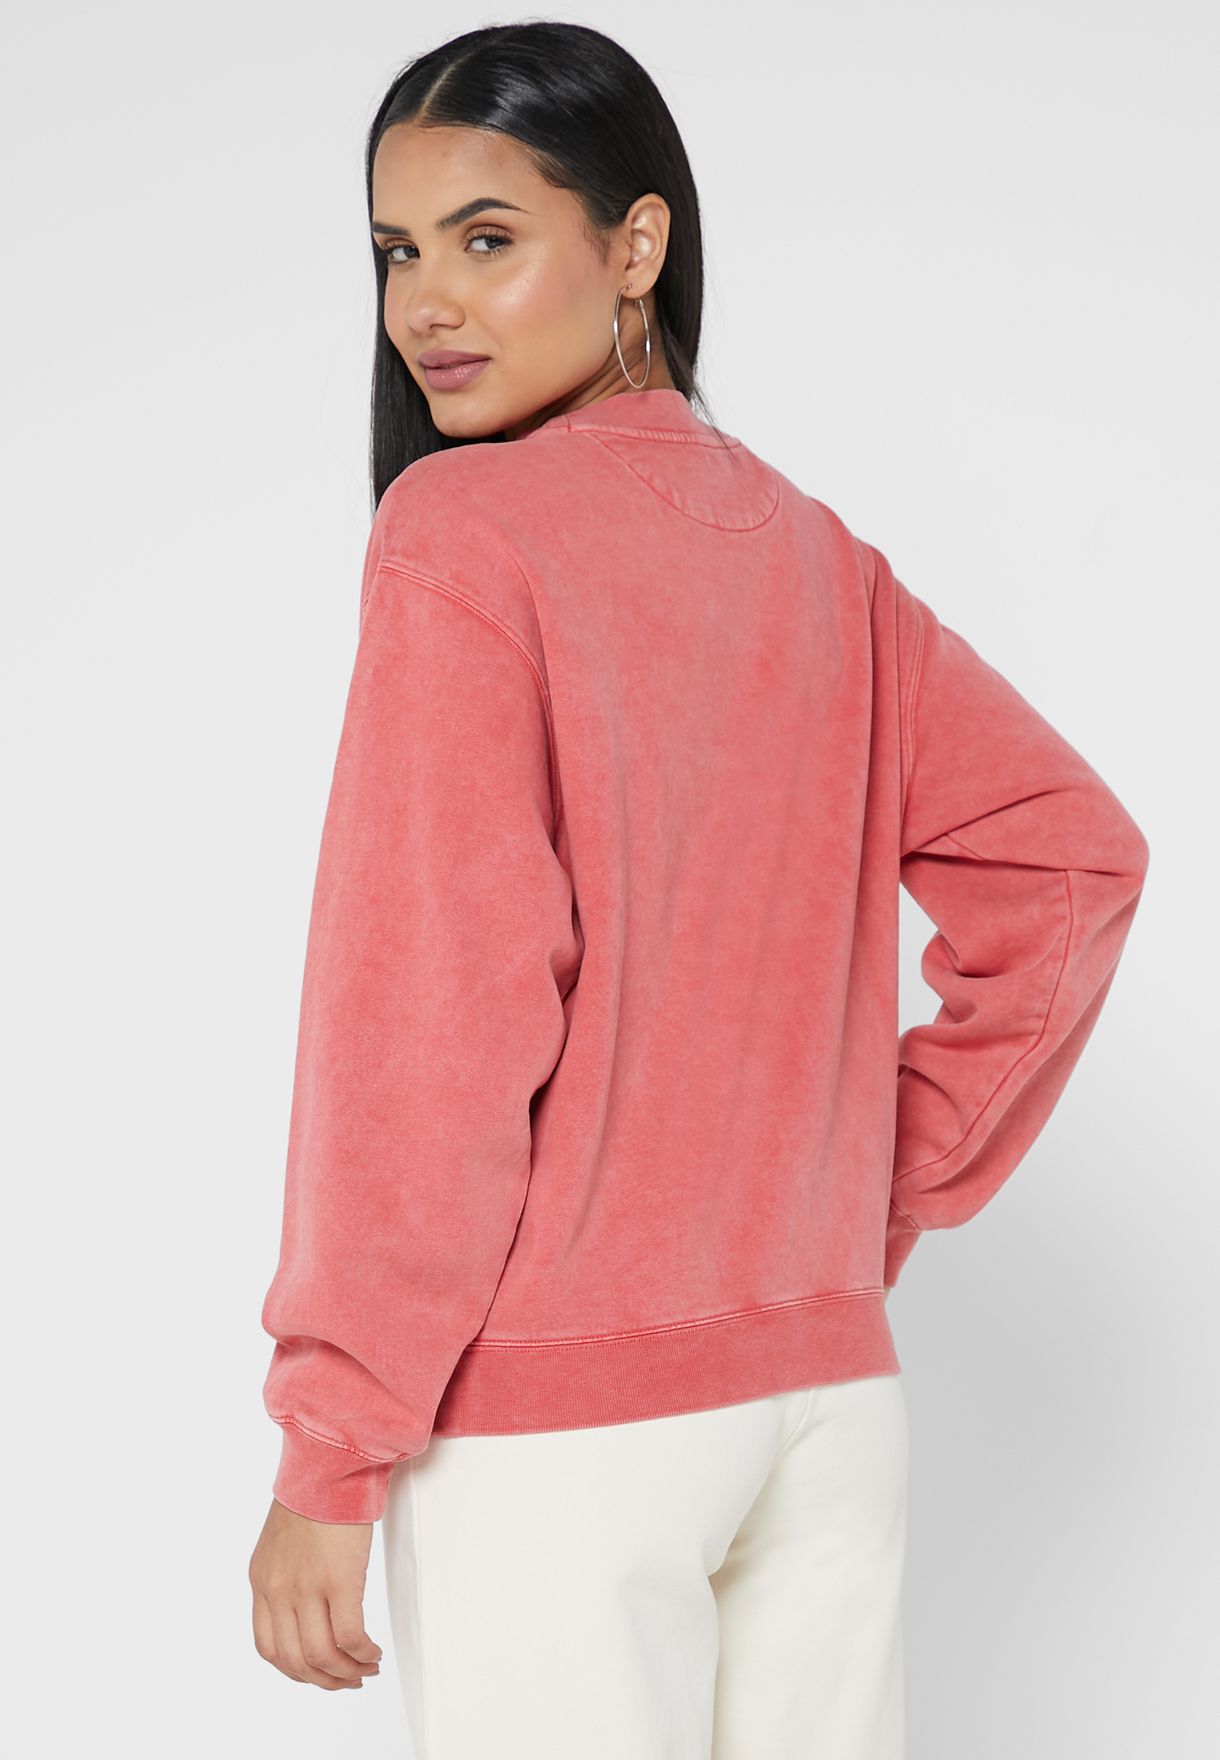 Ribbed Cuff Graphic Detail Sweater